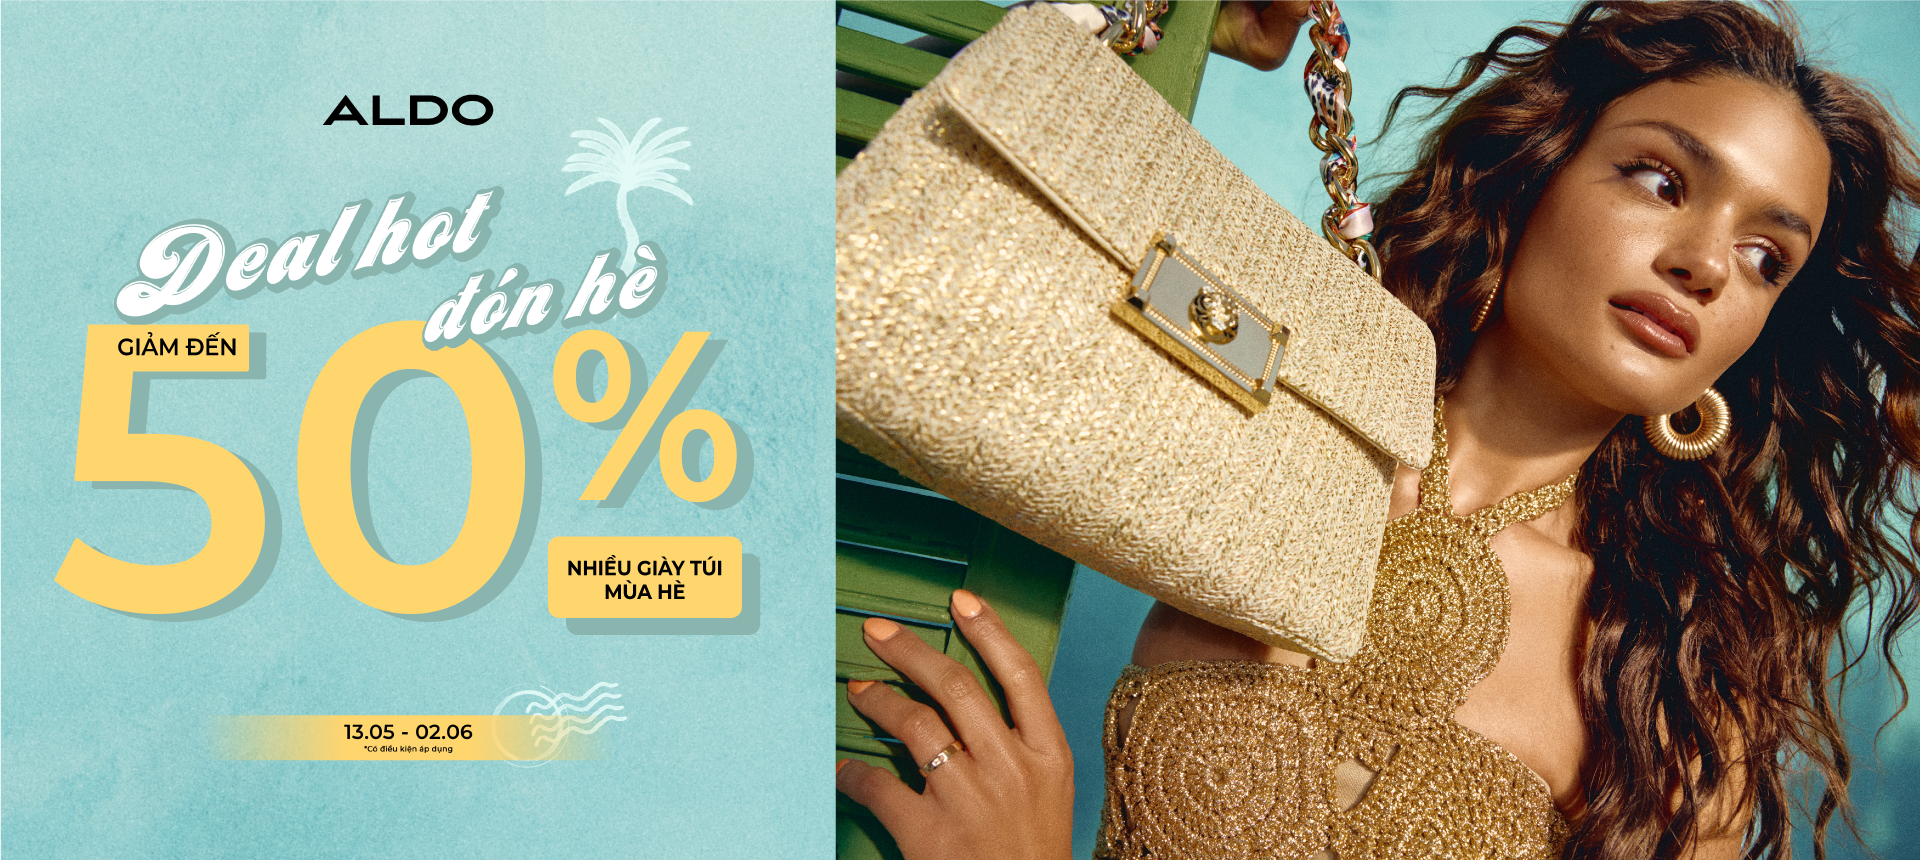 ALDO - SUMMER OF STYLES - HOT DEAL UP TO 50%